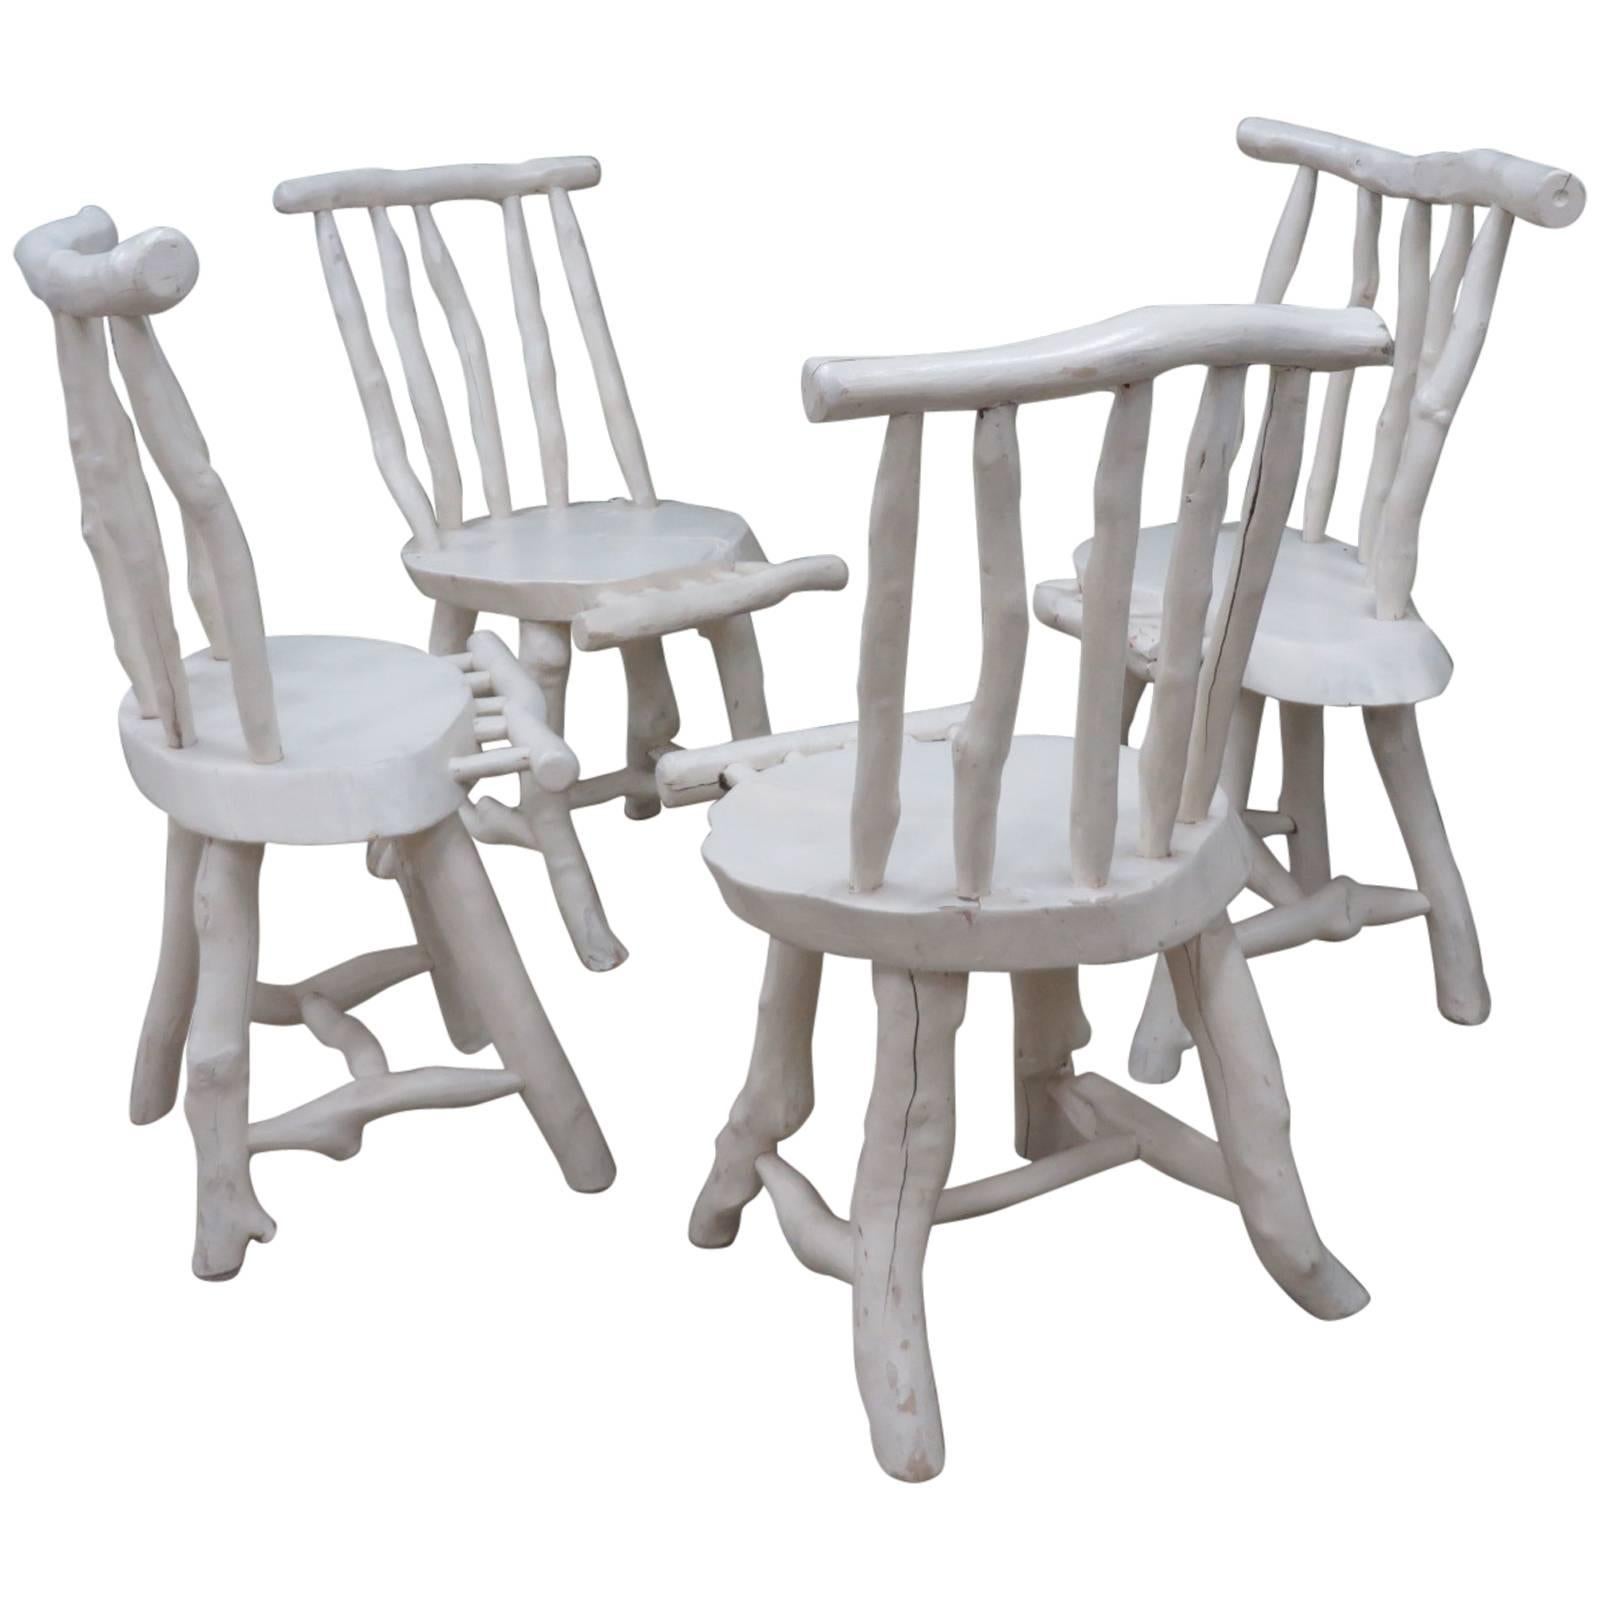 Four Rustic Adirondack Style Chairs